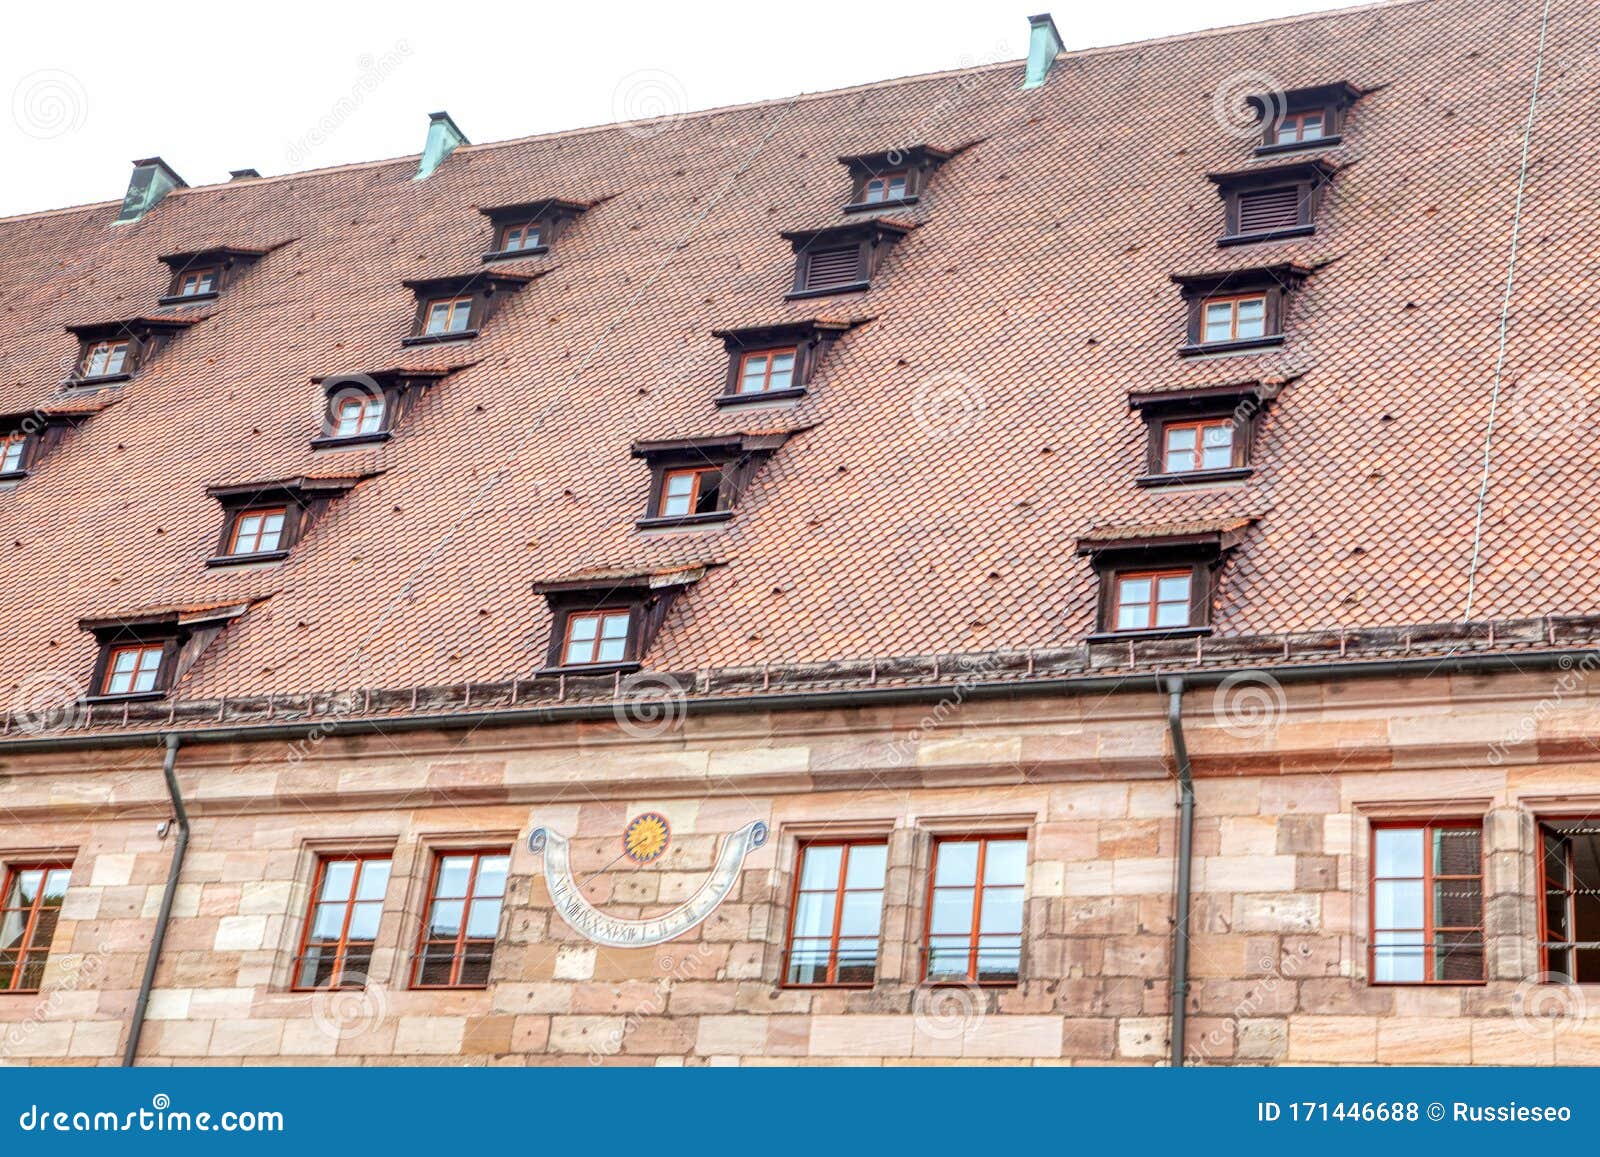 tiled roof with attics